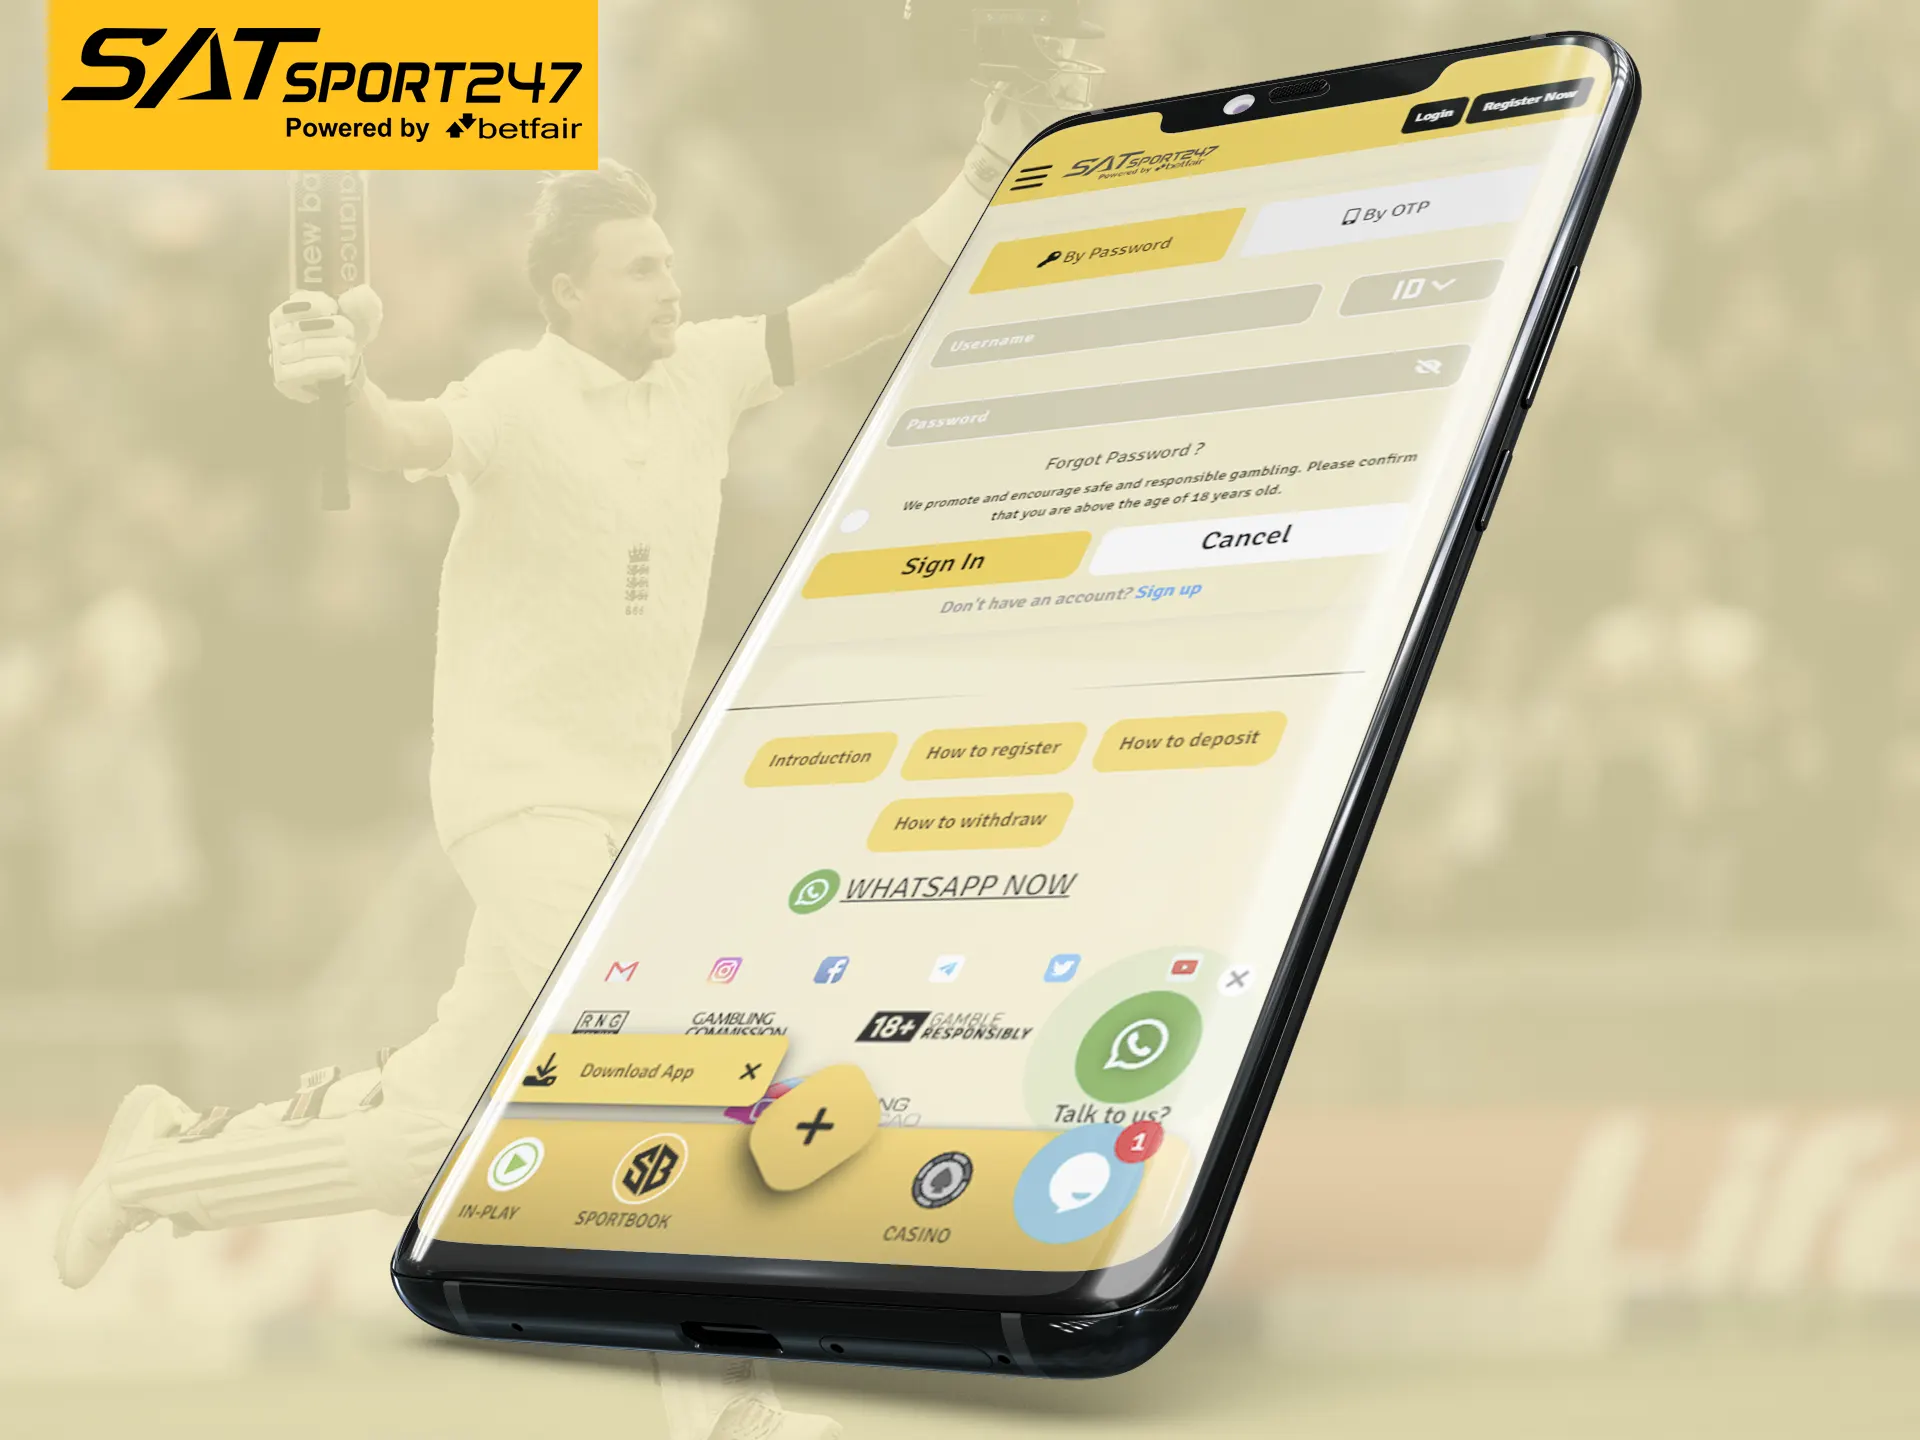 Log in to your account on the Satsport247 app.